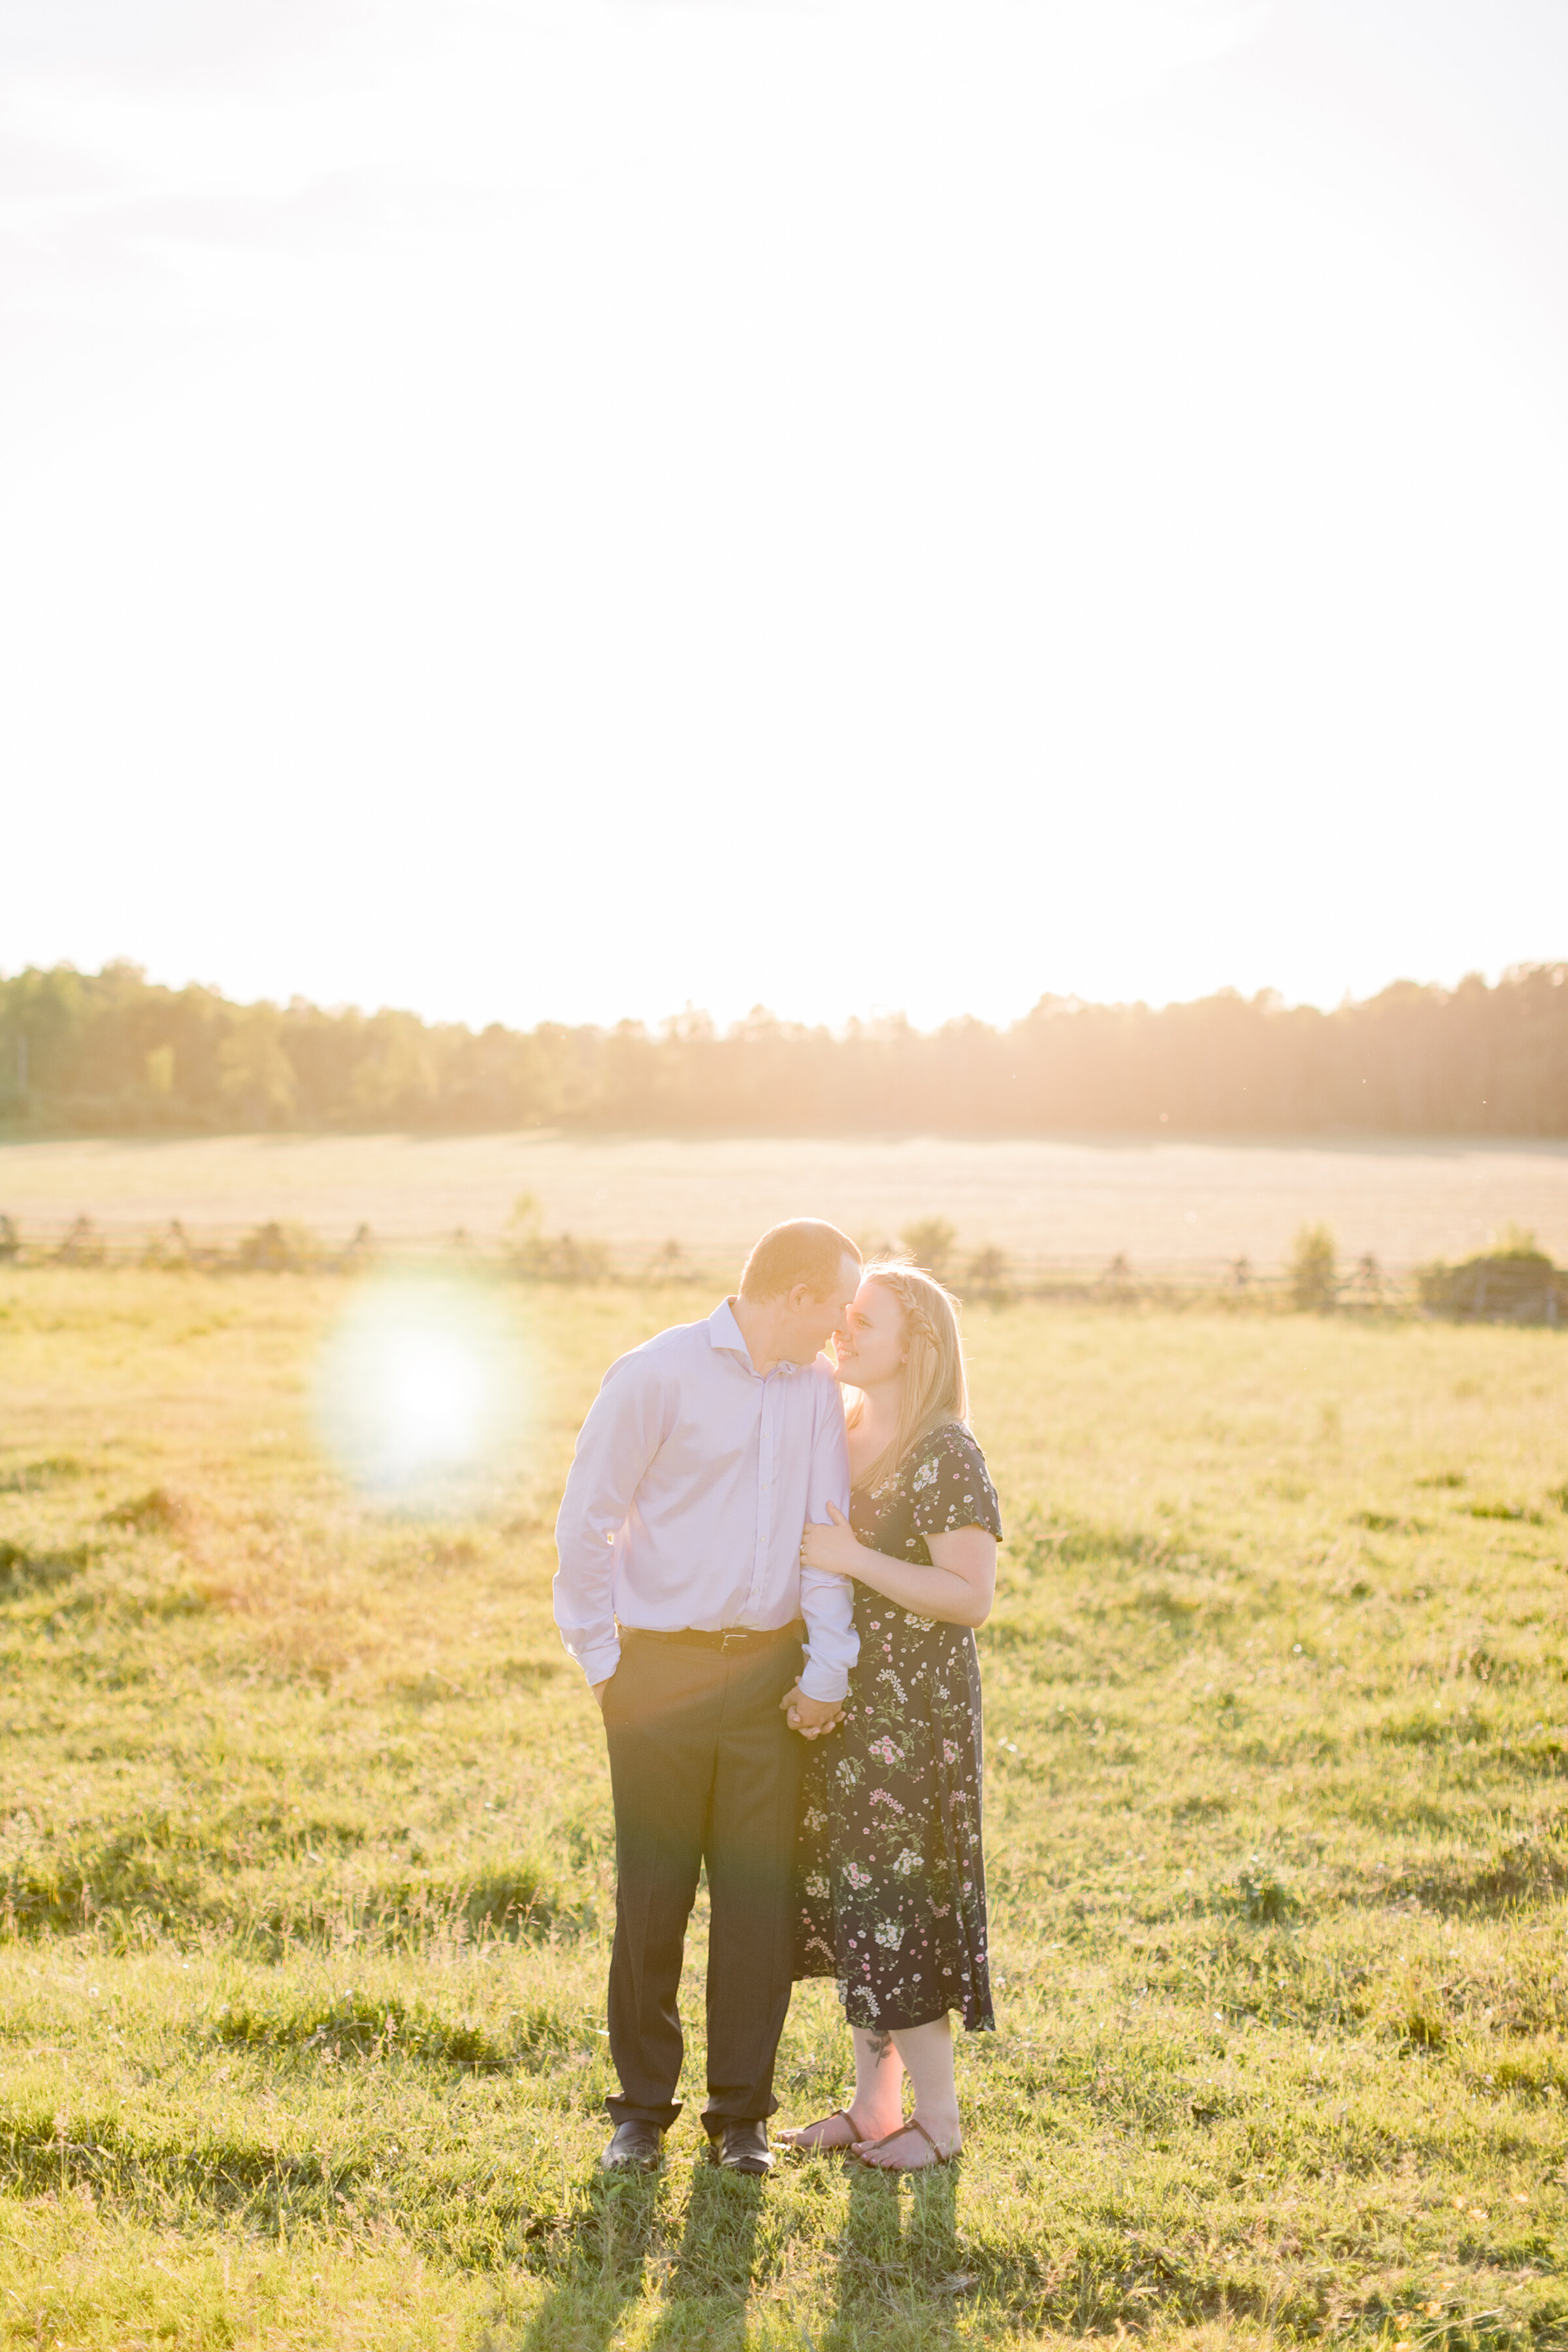  A couple kiss and the sun sets on the grassy field in a stunning country styled engagement session on the farm. Chelsea Mason Photography engagement session goals ideas and inspiration client attire farm aesthetic outdoor photo shoot session couple 